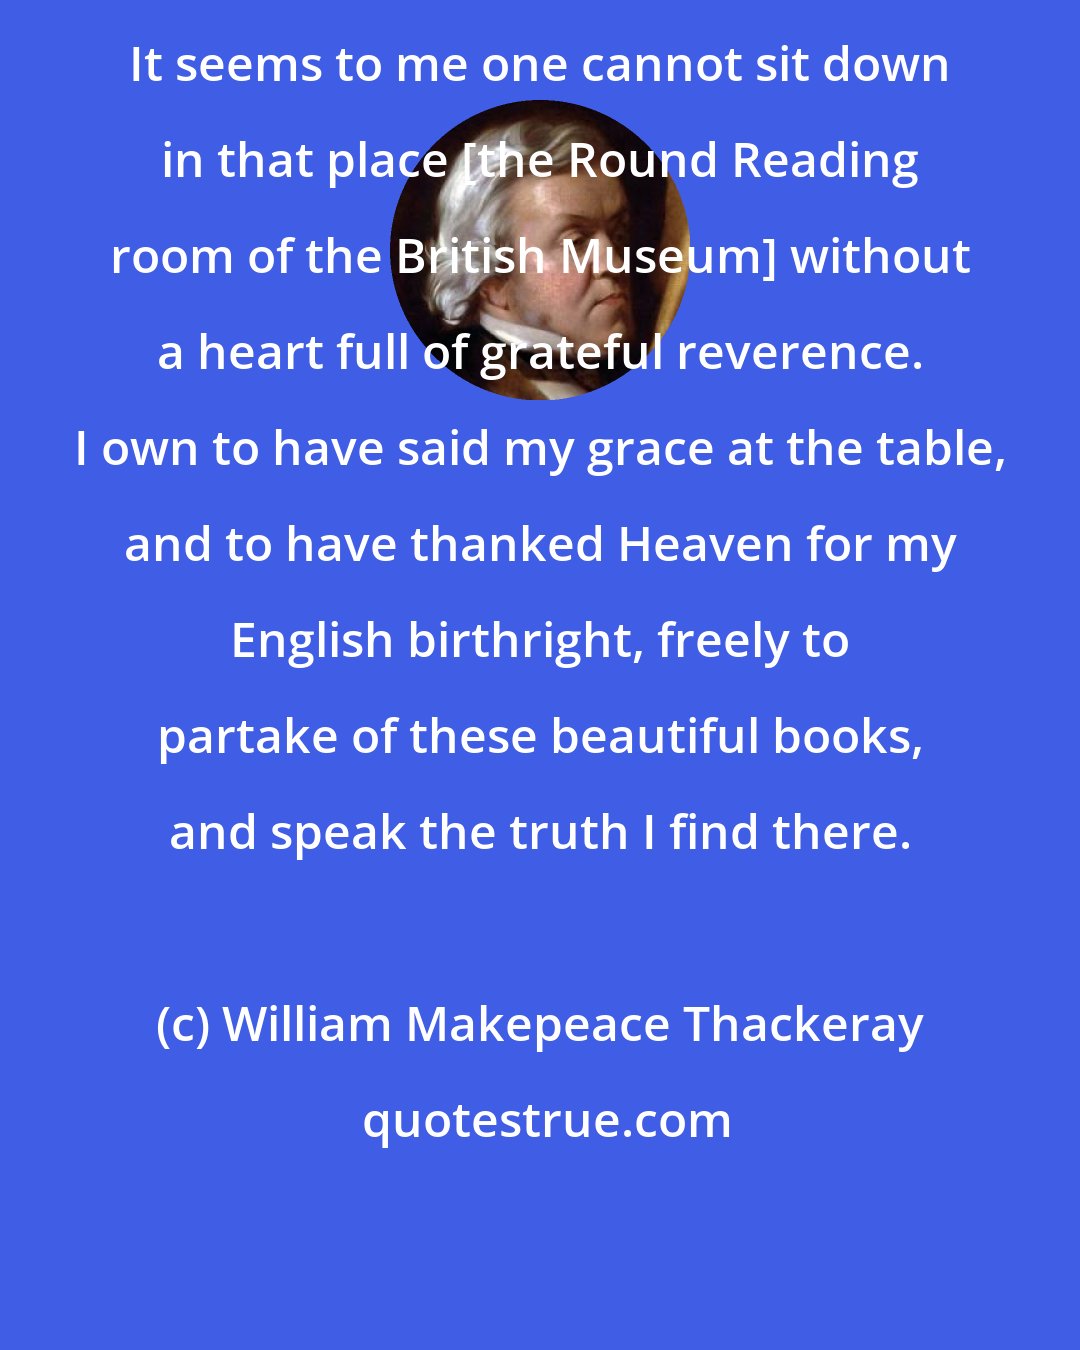 William Makepeace Thackeray: It seems to me one cannot sit down in that place [the Round Reading room of the British Museum] without a heart full of grateful reverence. I own to have said my grace at the table, and to have thanked Heaven for my English birthright, freely to partake of these beautiful books, and speak the truth I find there.